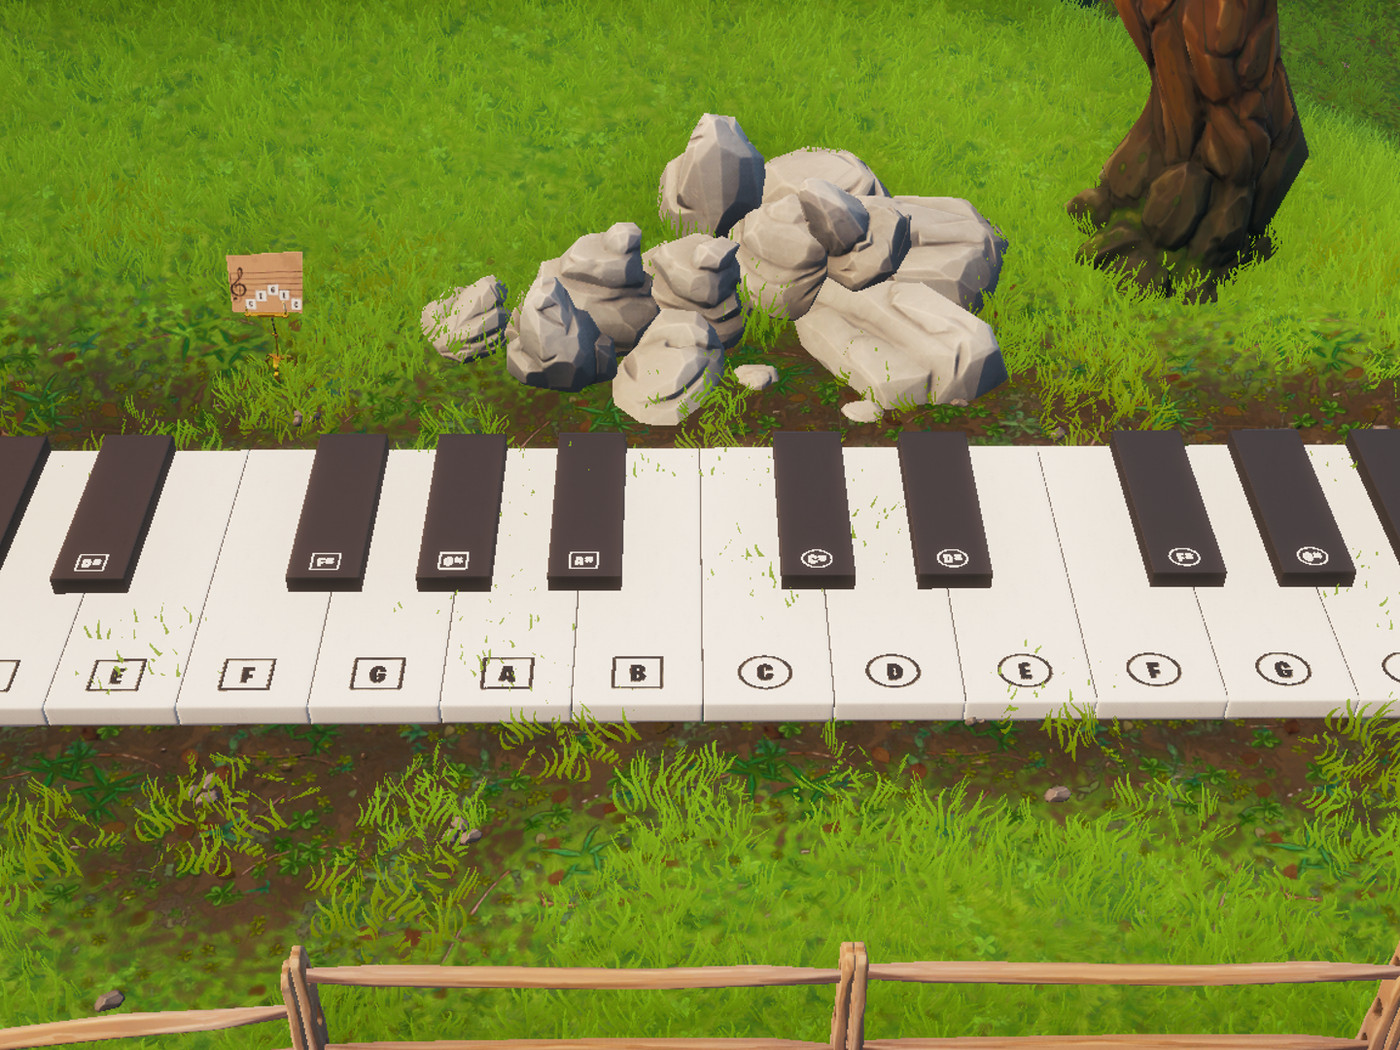 Fortnite Mission Visit An Oversized Piano And Play The Sheet